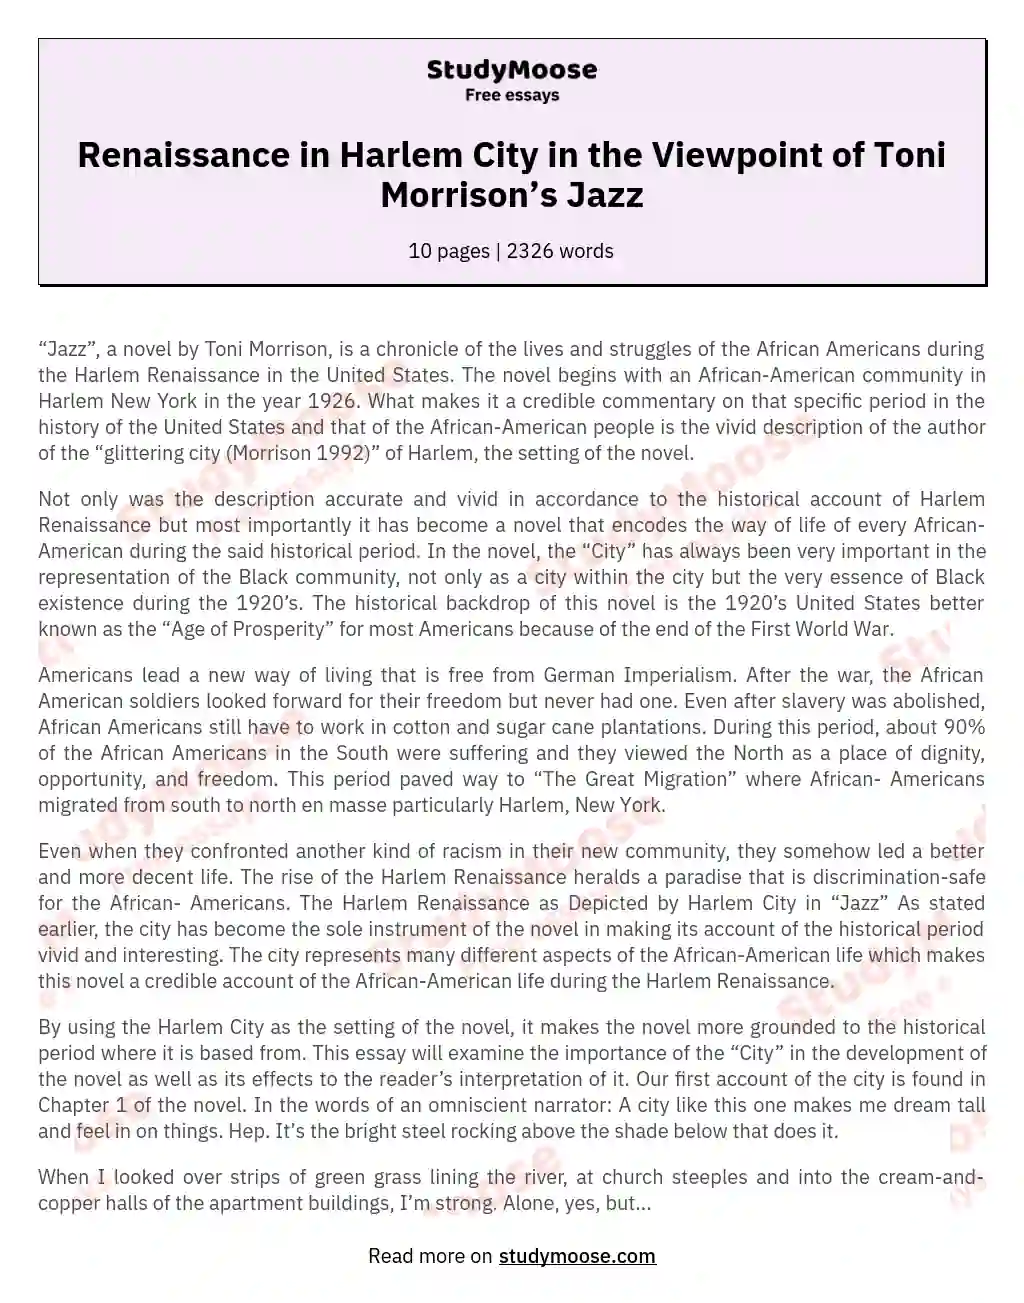 Renaissance in Harlem City in the Viewpoint of Toni Morrison’s Jazz essay